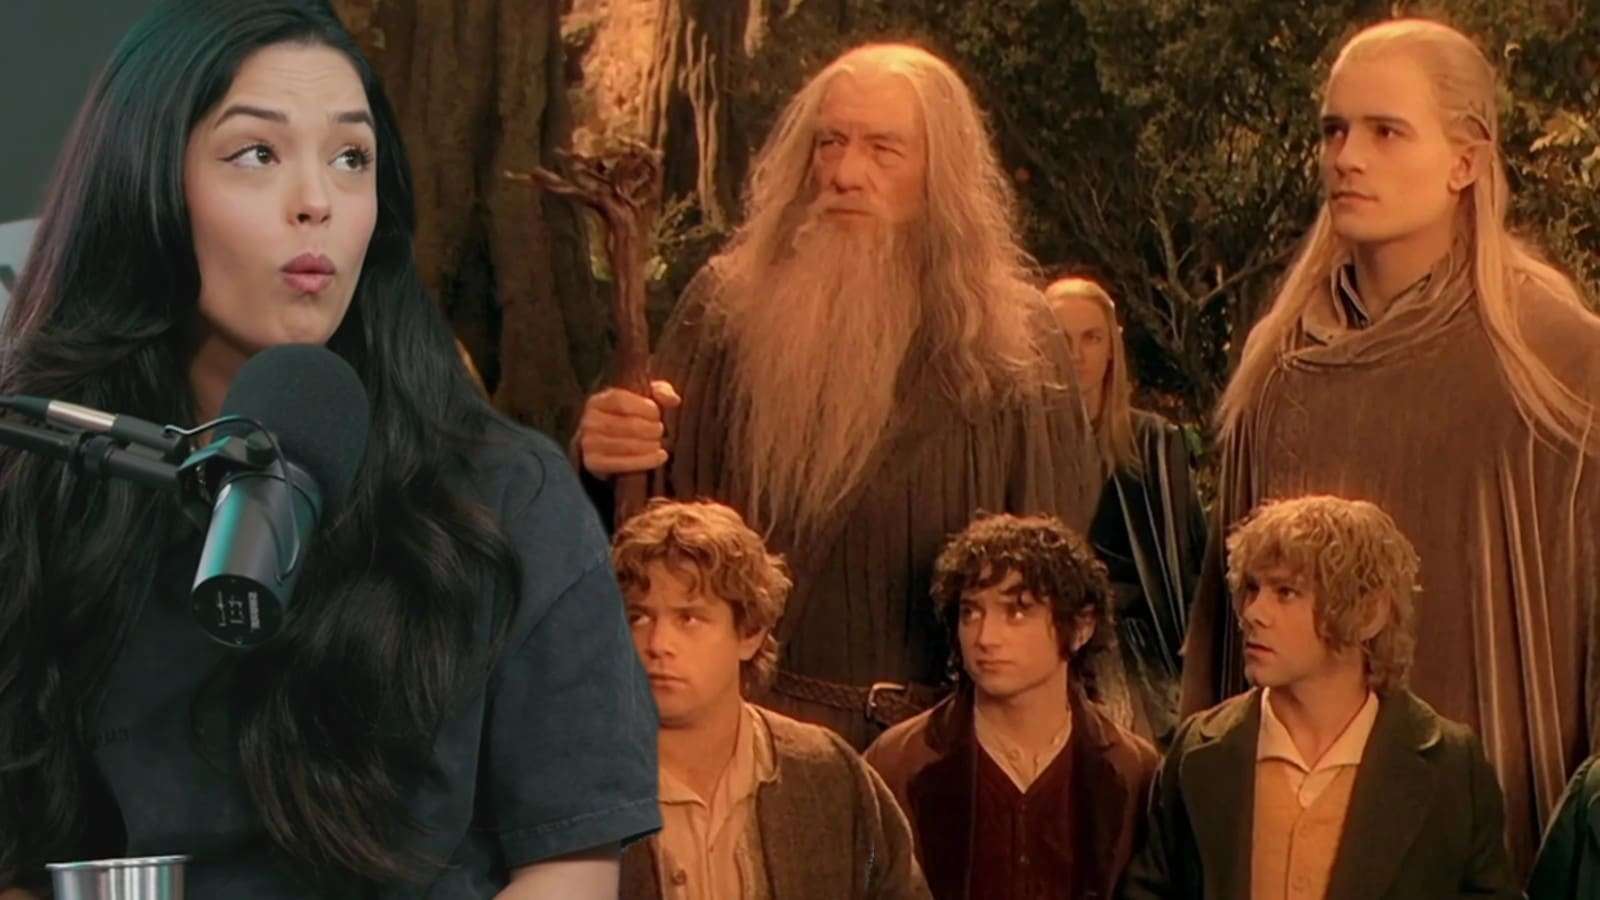 Valkyrae speaing on 100 Thieves 'Boomer vs. Zoomer' podcast with screenshot from The Fellowship of The Ring